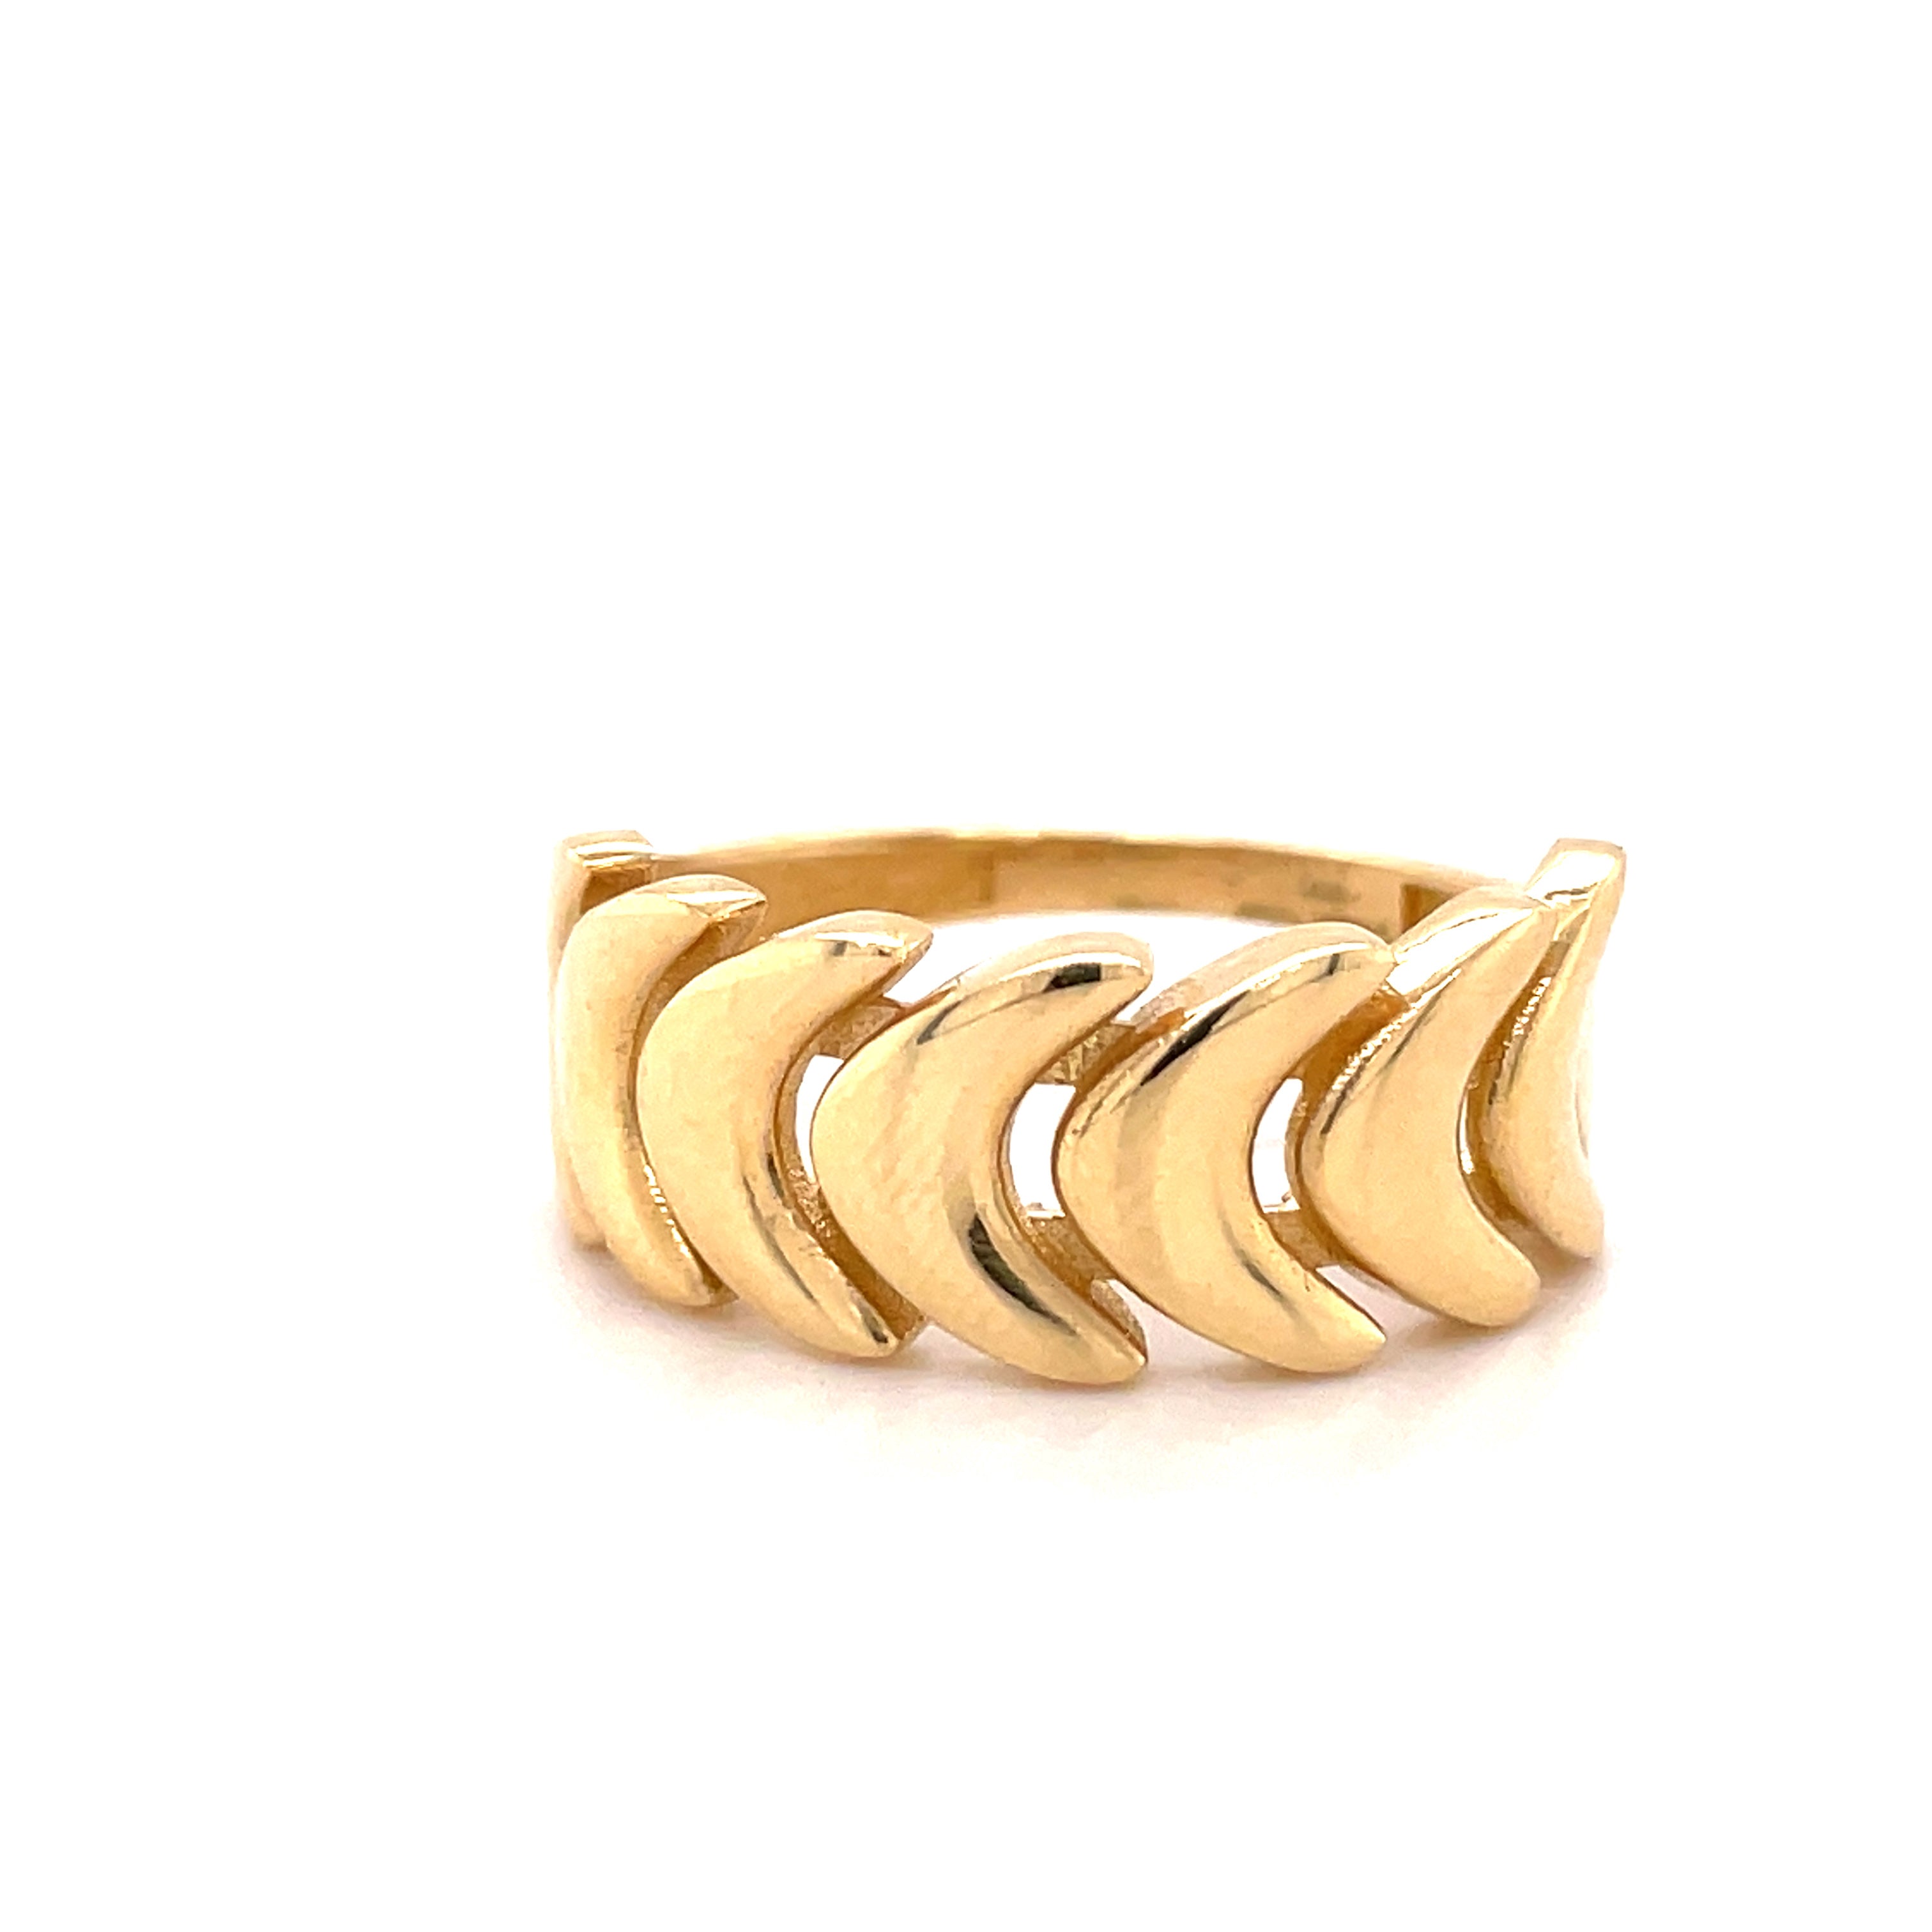 Expertly crafted in Italy, this 14k yellow gold wave ring adds a touch of elegance to any look. The unique wave style showcases the superior craftsmanship of Italian jewelry makers. Made with 14k gold, this ring is the perfect statement piece for any fashion-forward individual.